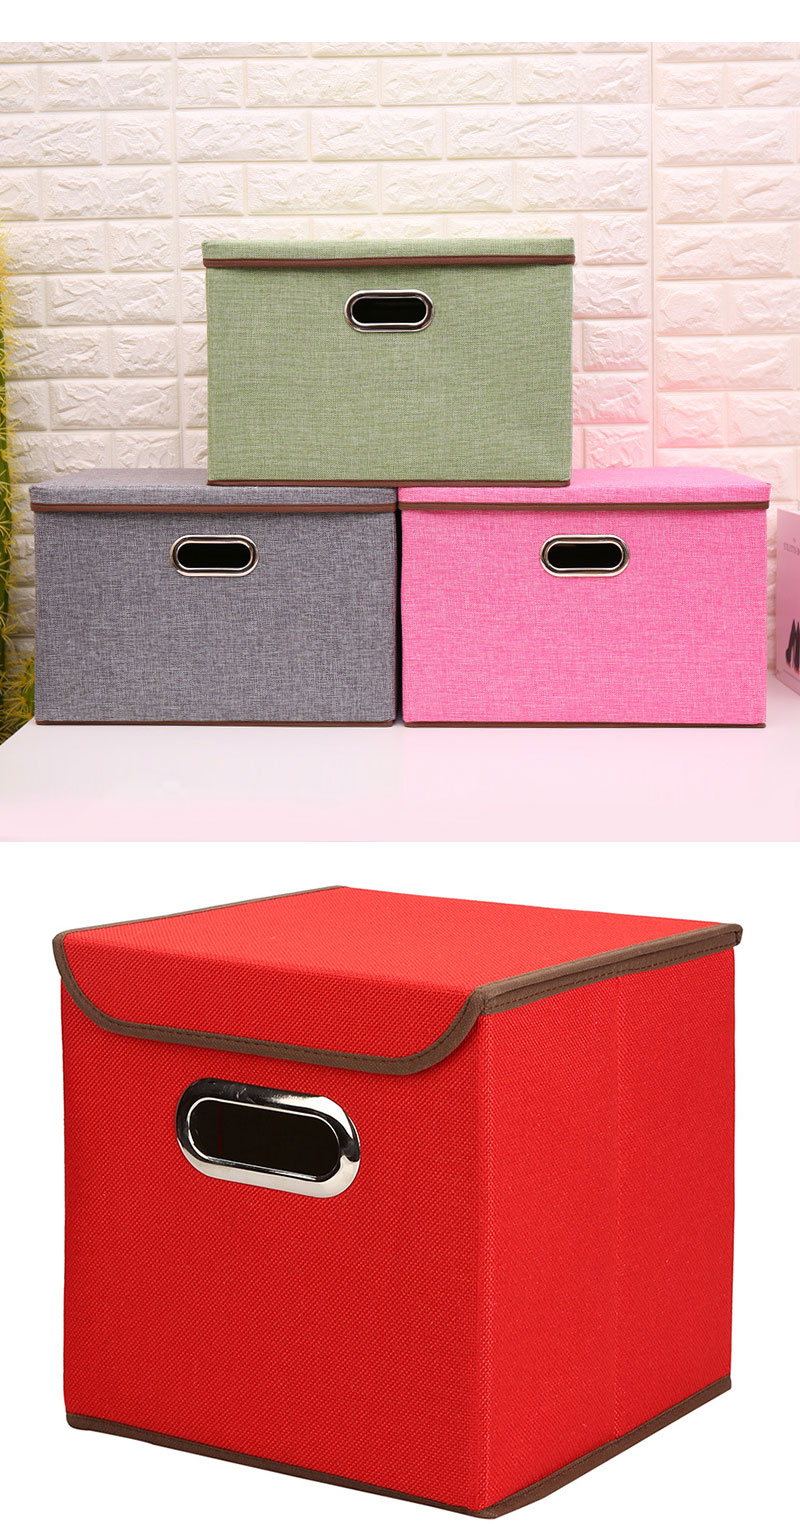 Colourful Clothes Organizer Solutions Foldable Fabric Bins Storage Box